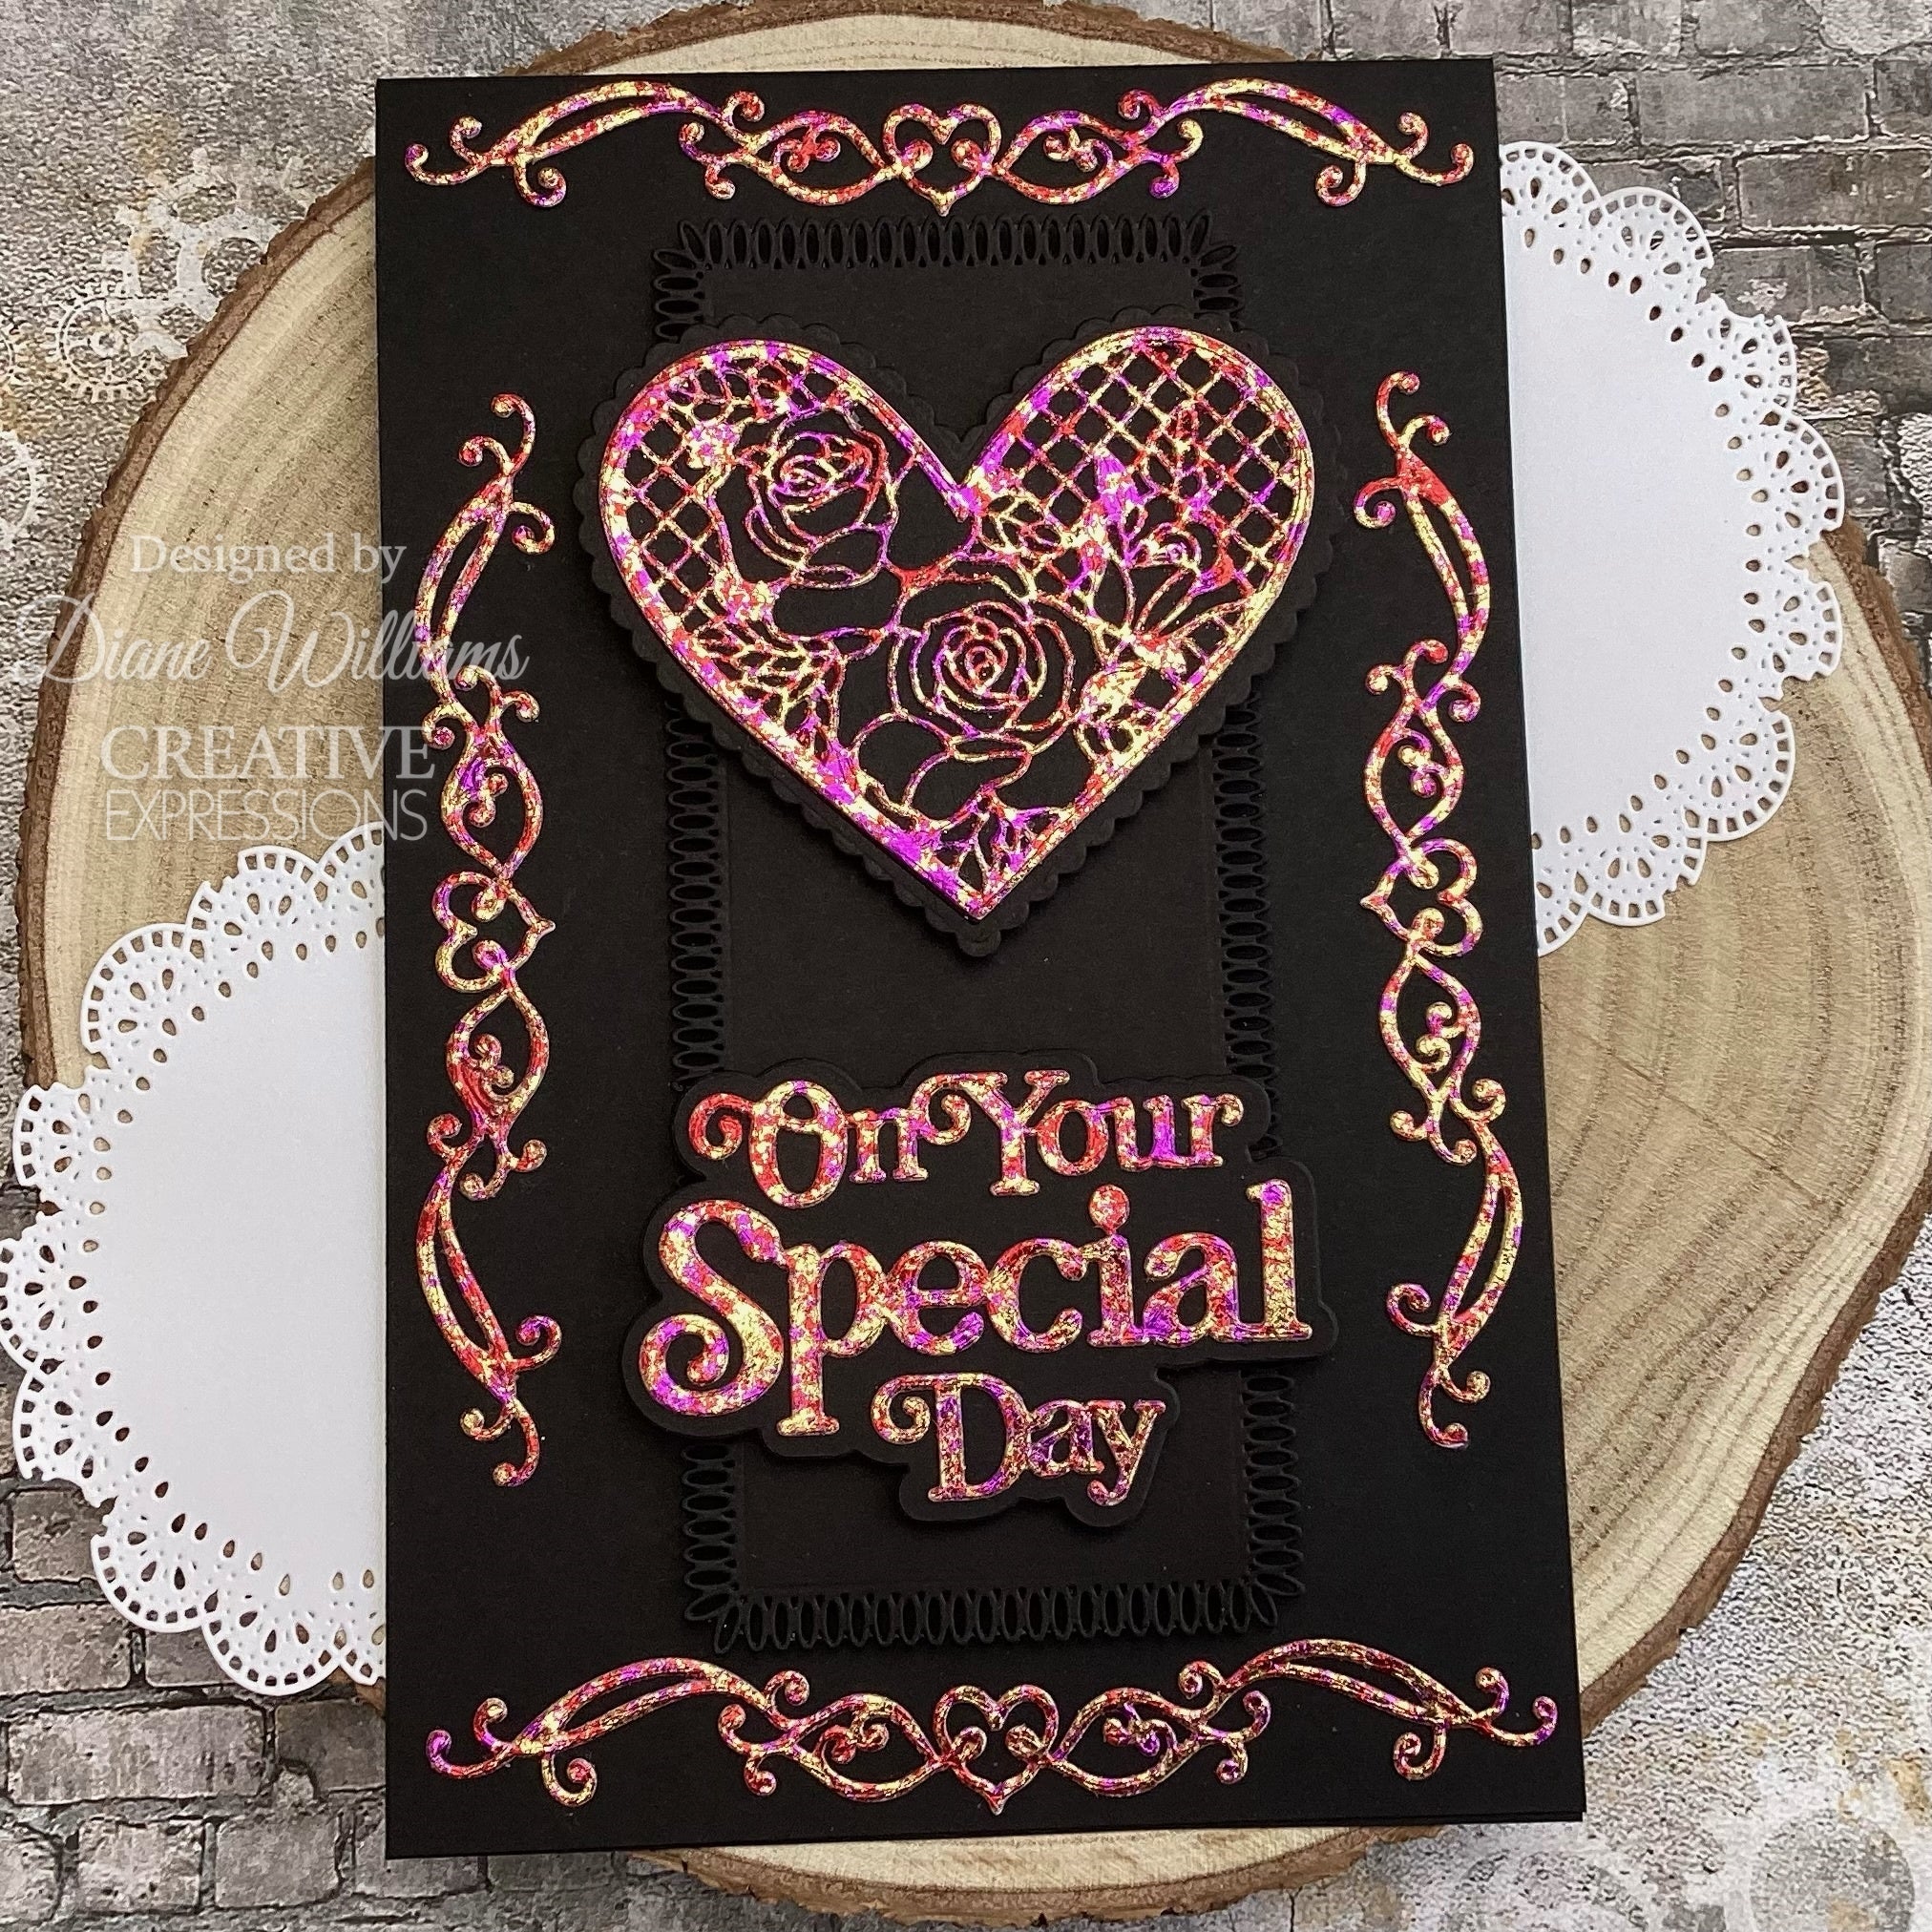 Creative Expressions Sue Wilson Border Collection Heart Scroll Craft Die